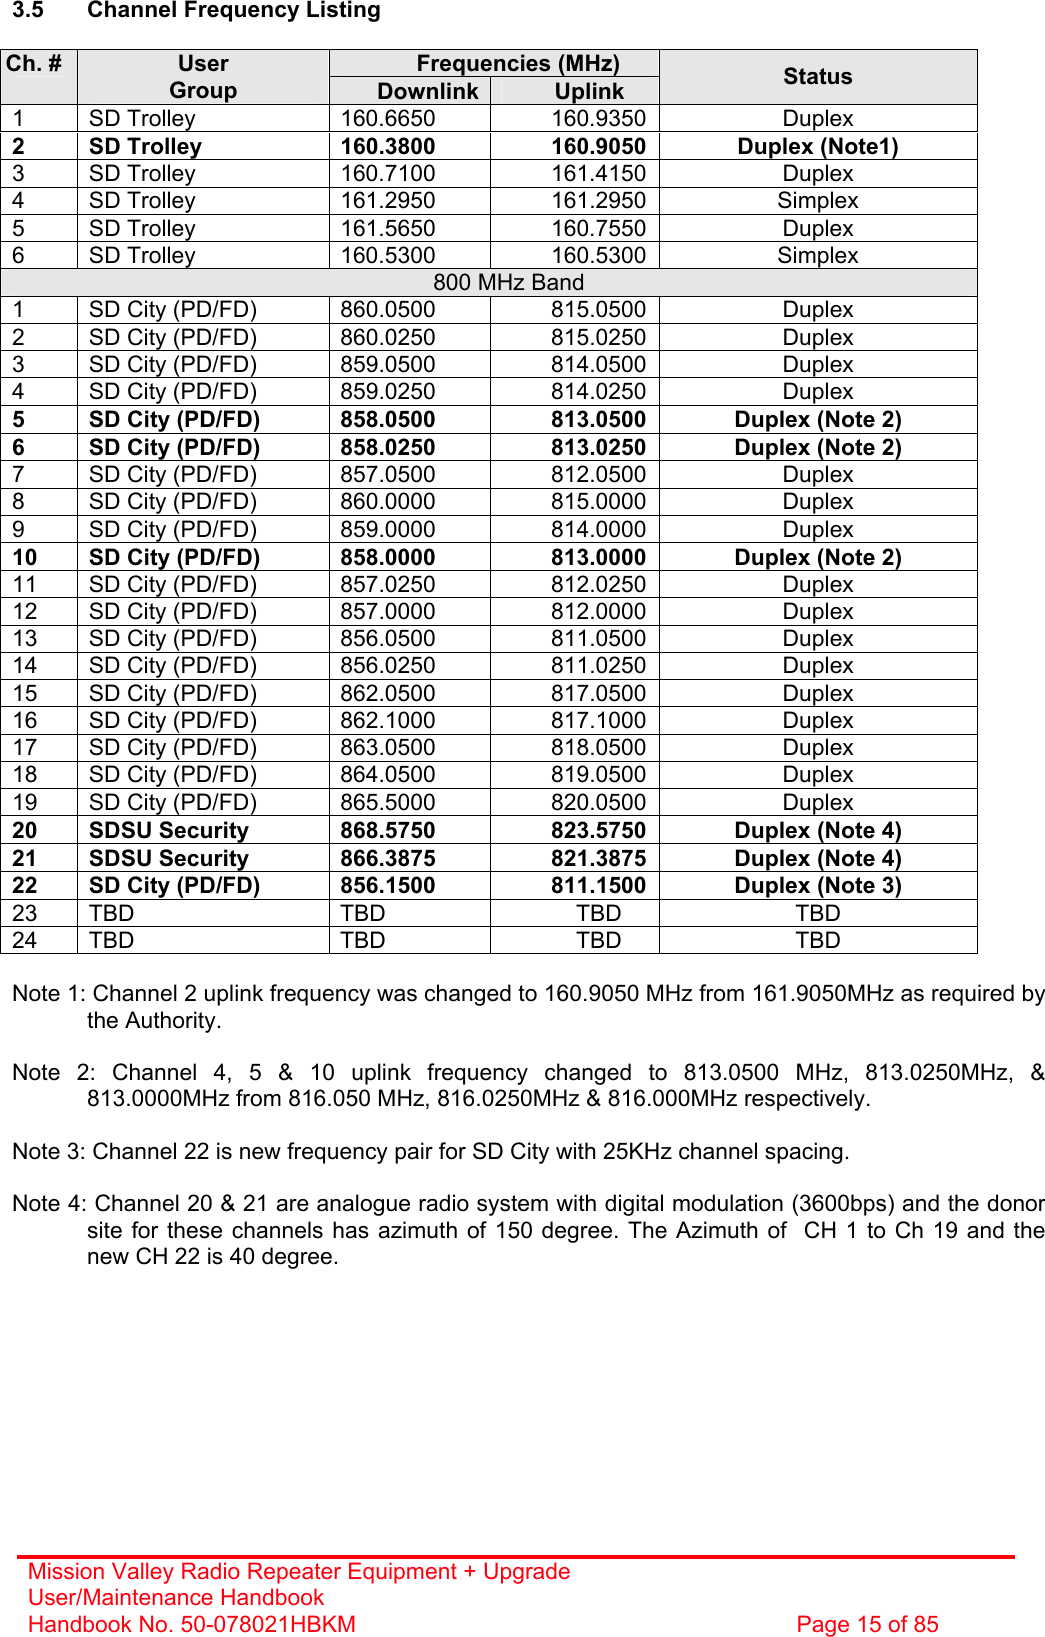 Mission Valley Radio Repeater Equipment + Upgrade User/Maintenance Handbook Handbook No. 50-078021HBKM  Page 15 of 85   3.5  Channel Frequency Listing  Frequencies (MHz) Ch. #  User Group  Downlink Uplink  Status 1 SD Trolley  160.6650  160.9350 Duplex 2  SD Trolley  160.3800  160.9050 Duplex (Note1) 3 SD Trolley  160.7100  161.4150 Duplex 4 SD Trolley  161.2950  161.2950 Simplex 5 SD Trolley  161.5650  160.7550 Duplex 6 SD Trolley  160.5300  160.5300 Simplex 800 MHz Band 1  SD City (PD/FD)  860.0500  815.0500 Duplex 2  SD City (PD/FD)  860.0250  815.0250 Duplex 3  SD City (PD/FD)  859.0500  814.0500 Duplex 4  SD City (PD/FD)  859.0250  814.0250 Duplex 5  SD City (PD/FD)  858.0500  813.0500 Duplex (Note 2) 6  SD City (PD/FD)  858.0250  813.0250 Duplex (Note 2) 7  SD City (PD/FD)  857.0500  812.0500 Duplex 8  SD City (PD/FD)  860.0000  815.0000 Duplex 9  SD City (PD/FD)  859.0000  814.0000 Duplex 10  SD City (PD/FD)  858.0000  813.0000 Duplex (Note 2) 11  SD City (PD/FD)  857.0250  812.0250 Duplex 12  SD City (PD/FD)  857.0000  812.0000 Duplex 13  SD City (PD/FD)  856.0500  811.0500 Duplex 14  SD City (PD/FD)  856.0250  811.0250 Duplex 15  SD City (PD/FD)  862.0500  817.0500 Duplex 16  SD City (PD/FD)  862.1000  817.1000 Duplex 17  SD City (PD/FD)  863.0500  818.0500 Duplex 18  SD City (PD/FD)  864.0500  819.0500 Duplex 19  SD City (PD/FD)  865.5000  820.0500 Duplex 20  SDSU Security  868.5750  823.5750 Duplex (Note 4) 21  SDSU Security  866.3875  821.3875 Duplex (Note 4) 22  SD City (PD/FD)  856.1500  811.1500 Duplex (Note 3) 23 TBD  TBD  TBD  TBD 24 TBD  TBD  TBD  TBD  Note 1: Channel 2 uplink frequency was changed to 160.9050 MHz from 161.9050MHz as required by the Authority.   Note 2: Channel 4, 5 &amp; 10 uplink frequency changed to 813.0500 MHz, 813.0250MHz, &amp; 813.0000MHz from 816.050 MHz, 816.0250MHz &amp; 816.000MHz respectively.  Note 3: Channel 22 is new frequency pair for SD City with 25KHz channel spacing.  Note 4: Channel 20 &amp; 21 are analogue radio system with digital modulation (3600bps) and the donor site for these channels has azimuth of 150 degree. The Azimuth of  CH 1 to Ch 19 and the new CH 22 is 40 degree. 